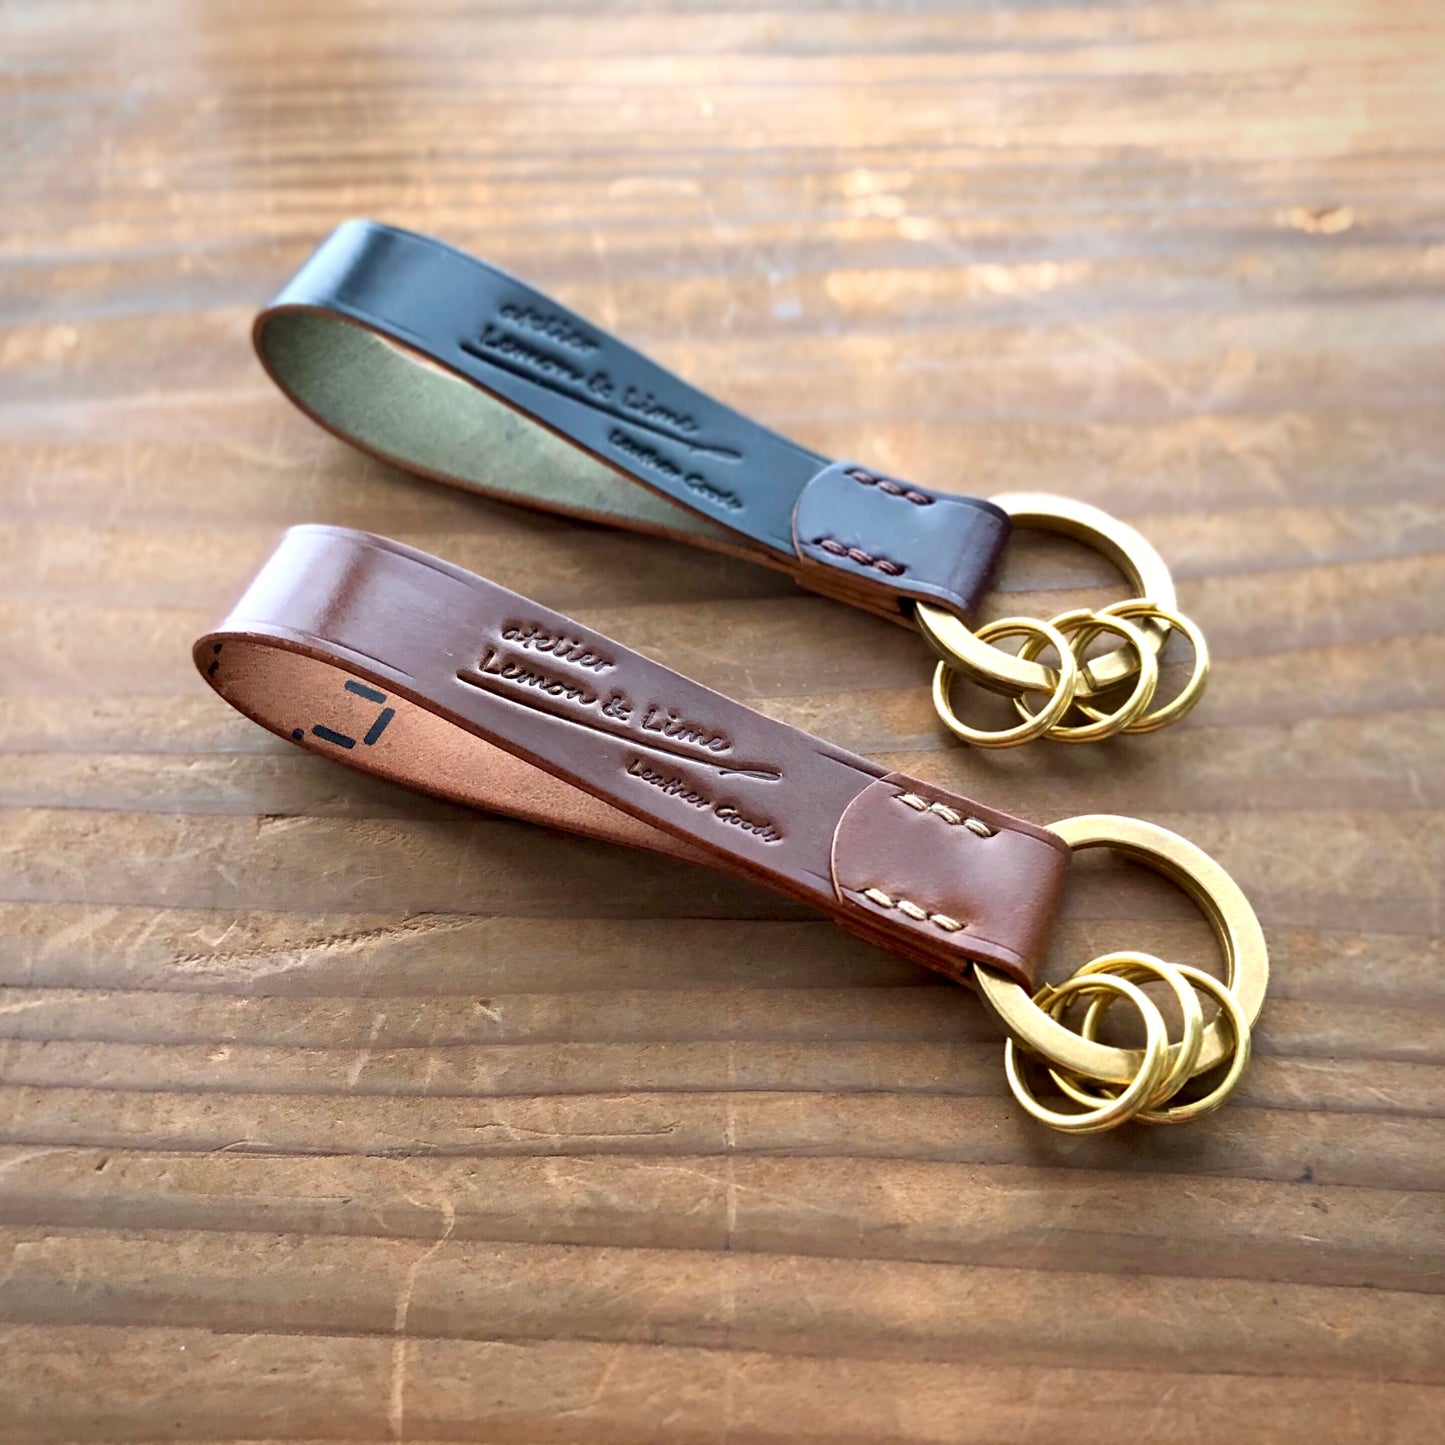 Shell Key Fob (Type A)【Horween】シェルコードバンのキーフォブ (A)